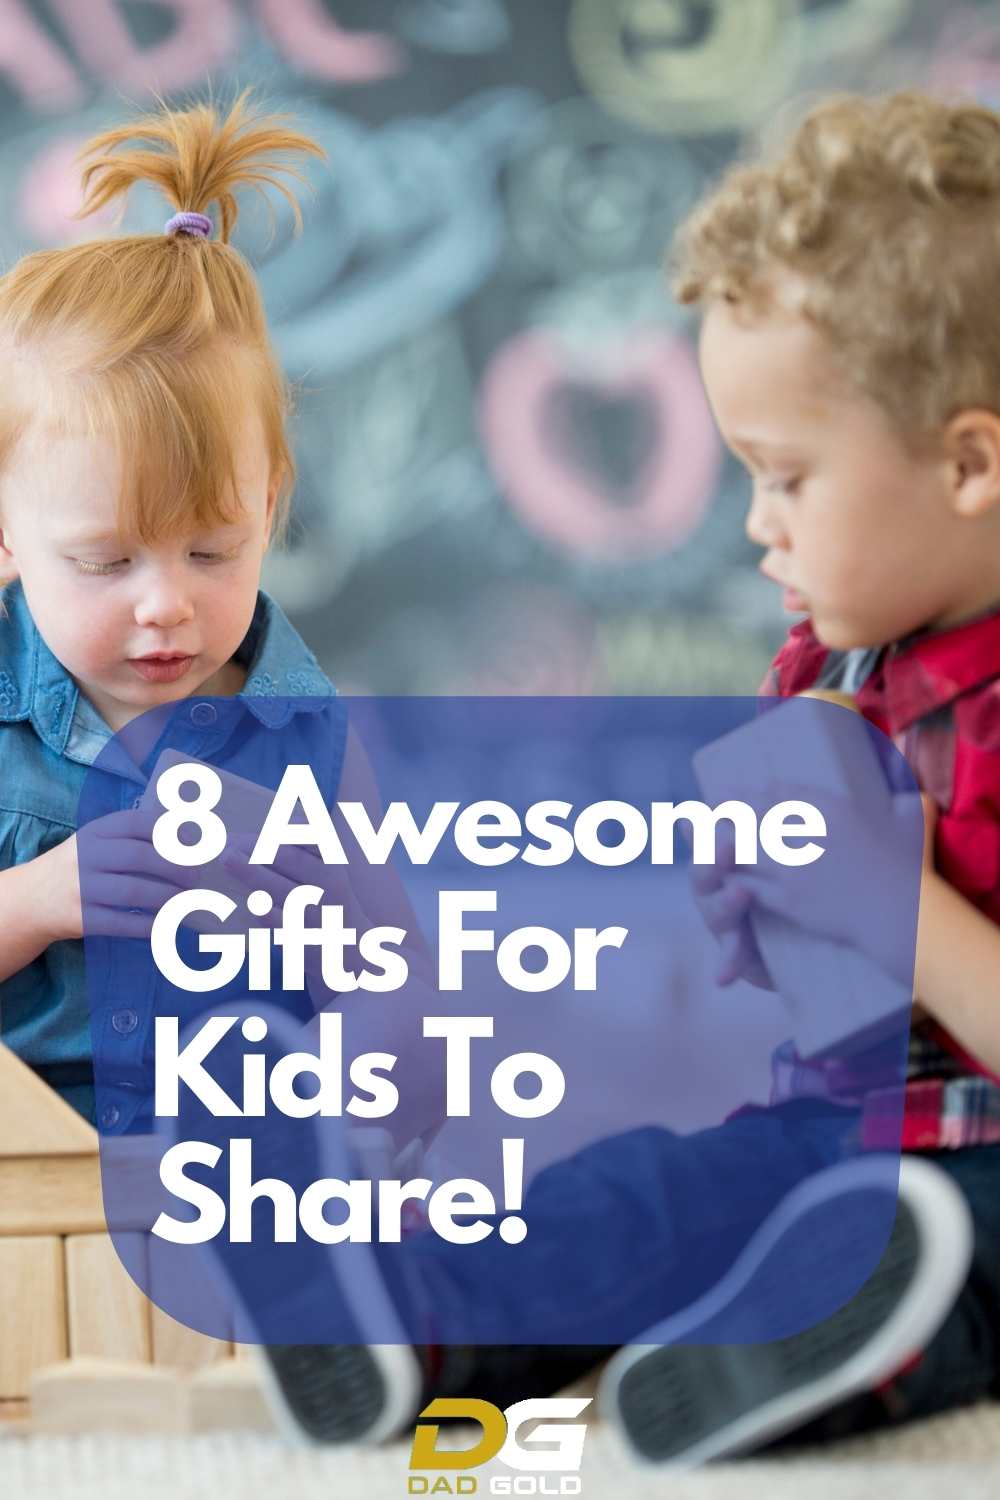 8 Awesome Gifts For Kids To Share